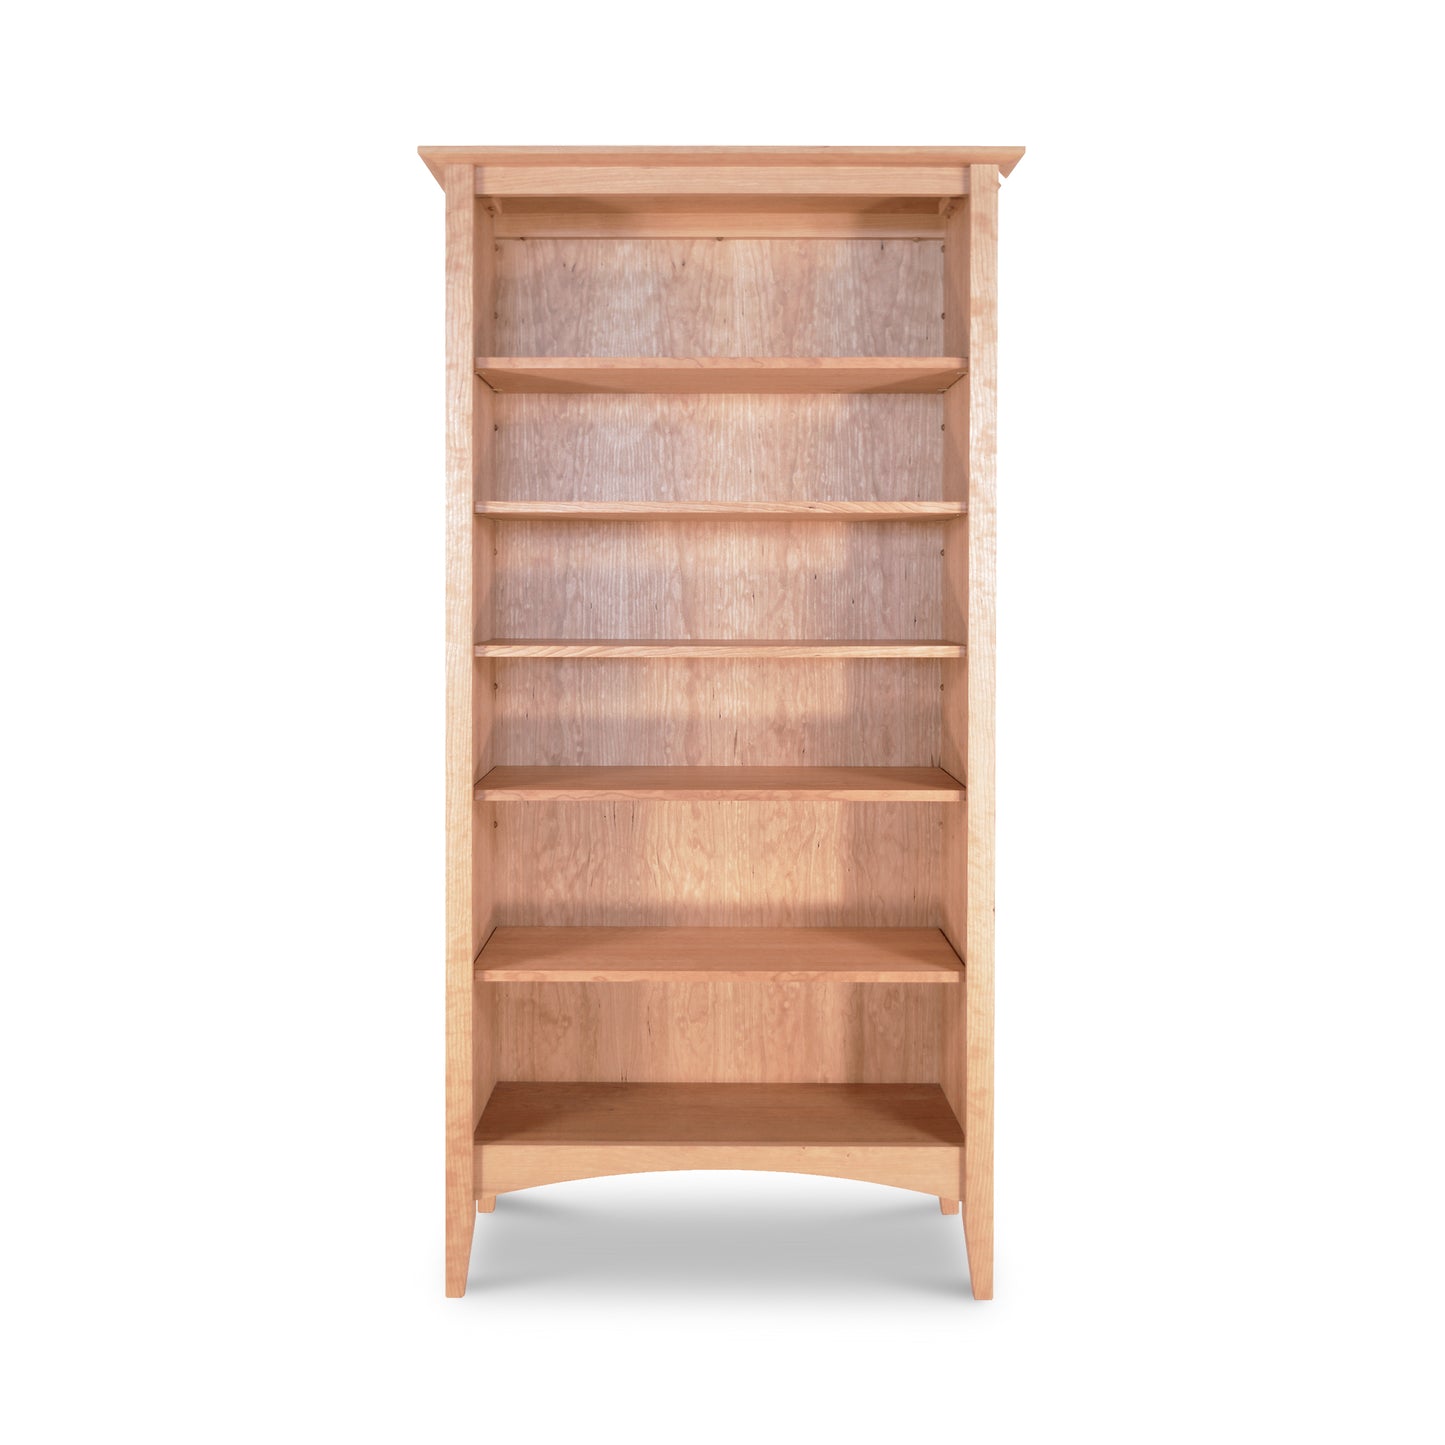 A Maple Corner Woodworks American Shaker Bookcase, constructed from sustainably harvested hardwoods, with five shelves, empty and isolated on a white background.